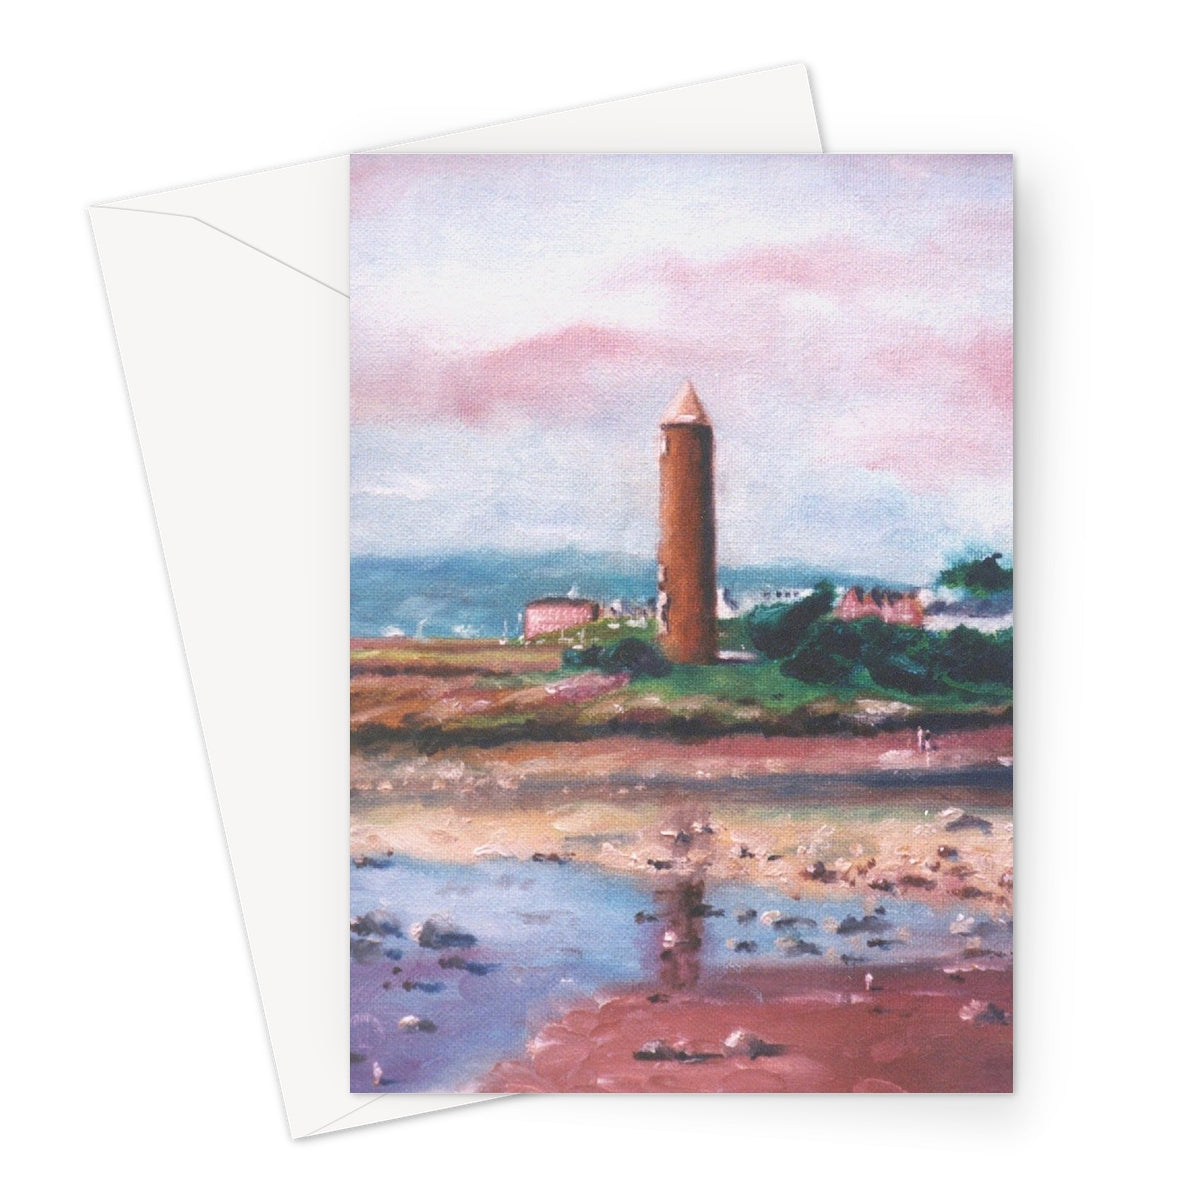 Pencil Point Largs Art Gifts Greeting Card-Stationery-River Clyde Art Gallery-A5 Portrait-1 Card-Paintings, Prints, Homeware, Art Gifts From Scotland By Scottish Artist Kevin Hunter